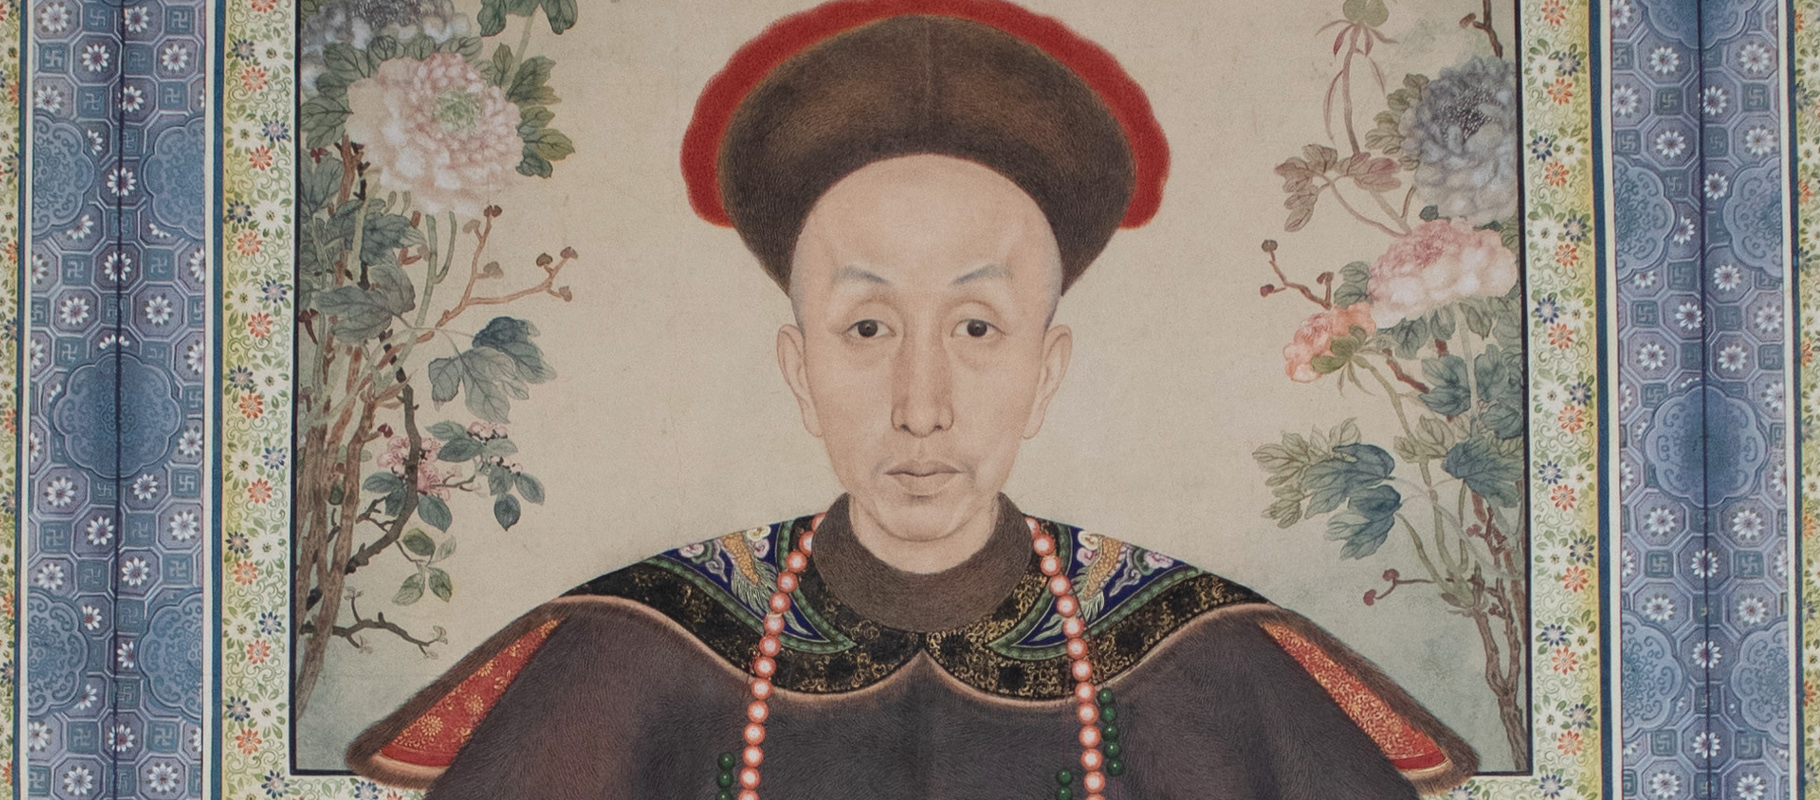 Late 18th century Chinese portrait